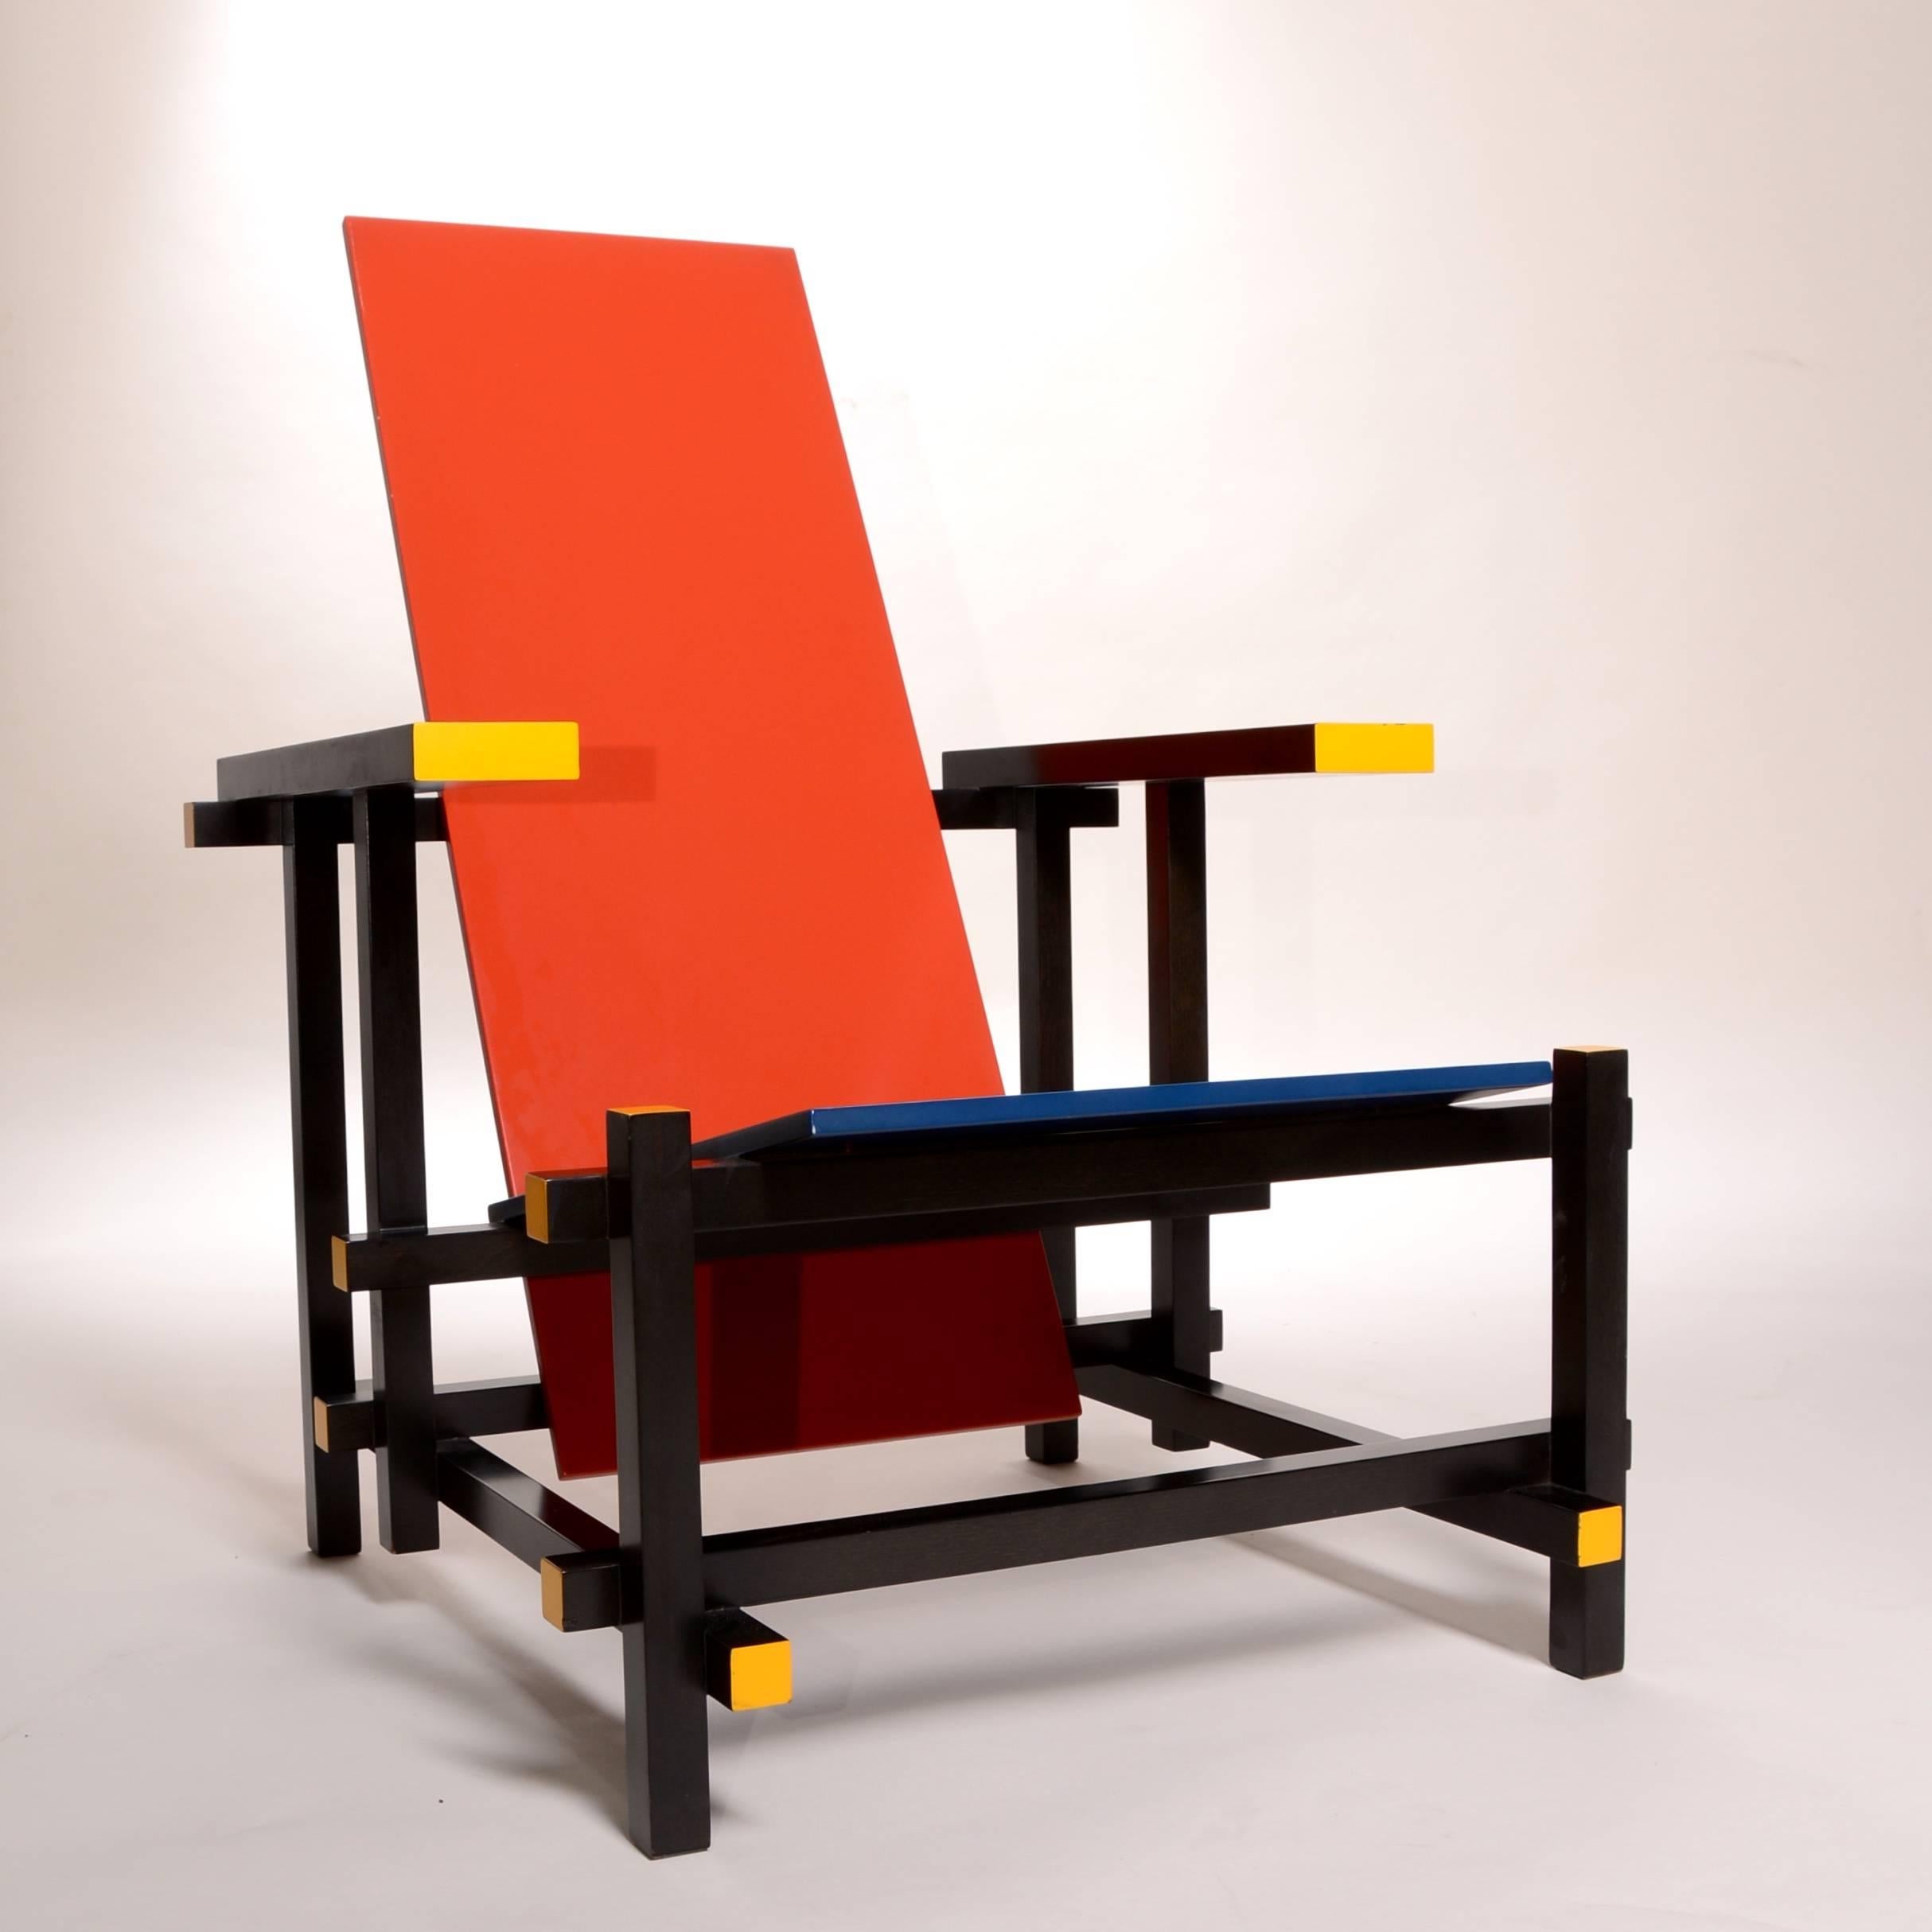 Red and blue chair by Gerrit Thomas Rietveld for Cassina, designed in 1918. This chair is from the estate of the great composer Gary Geld and is in excellent condition. Marked Cassina.